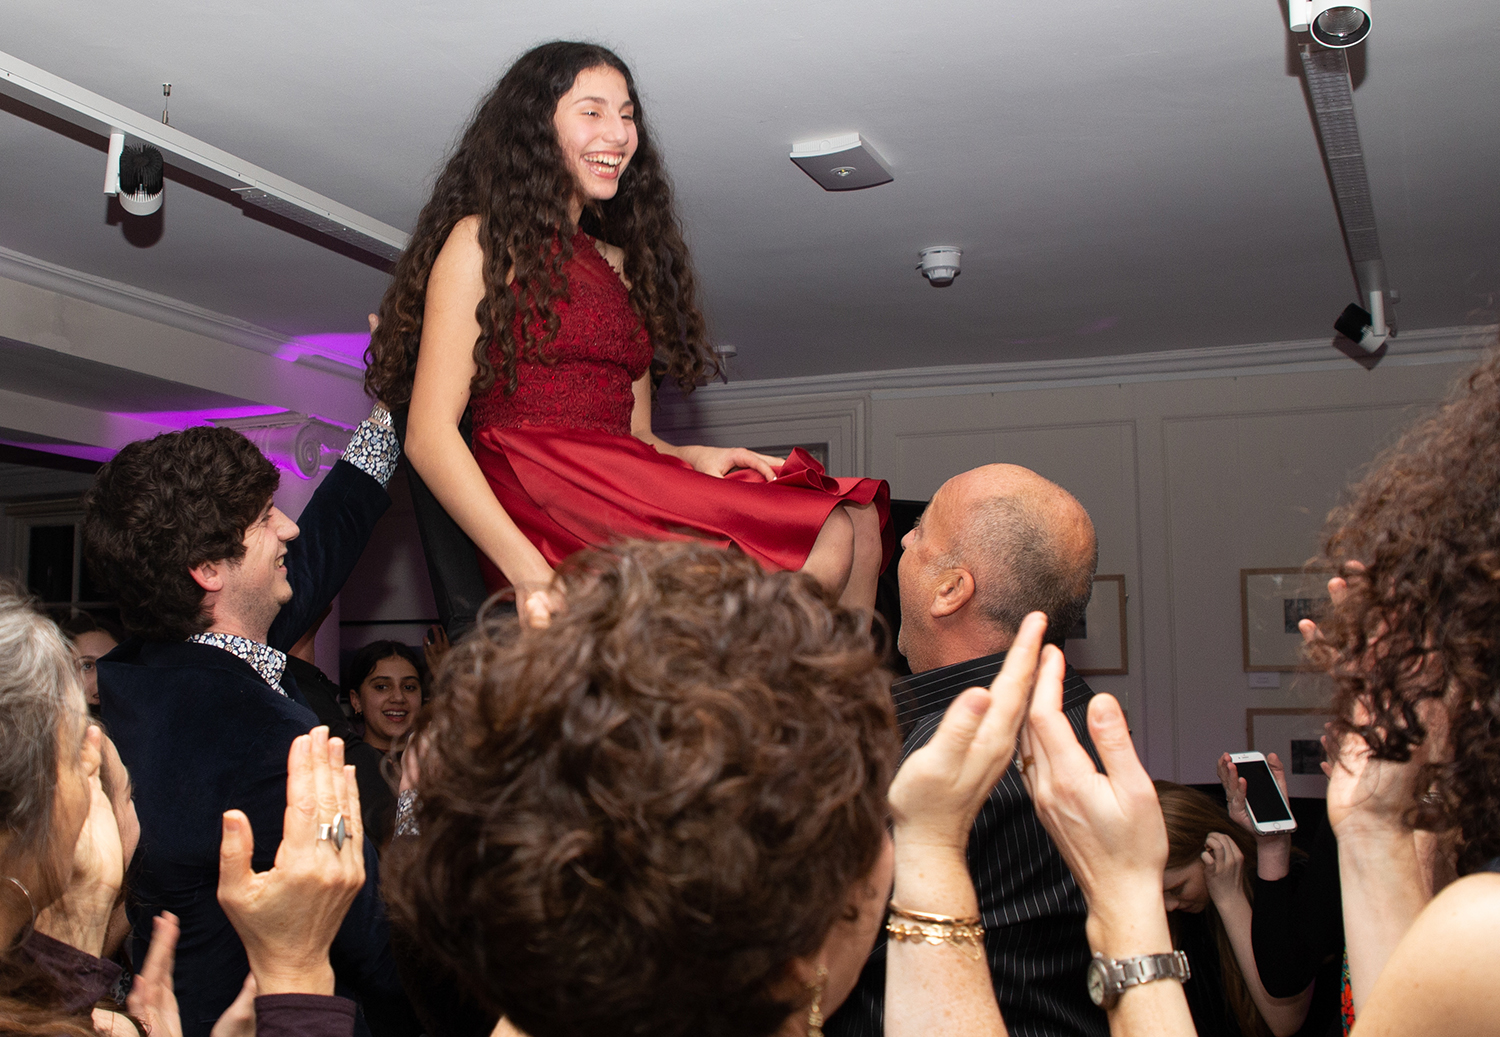 Girl in red dress being held up and danced around at party